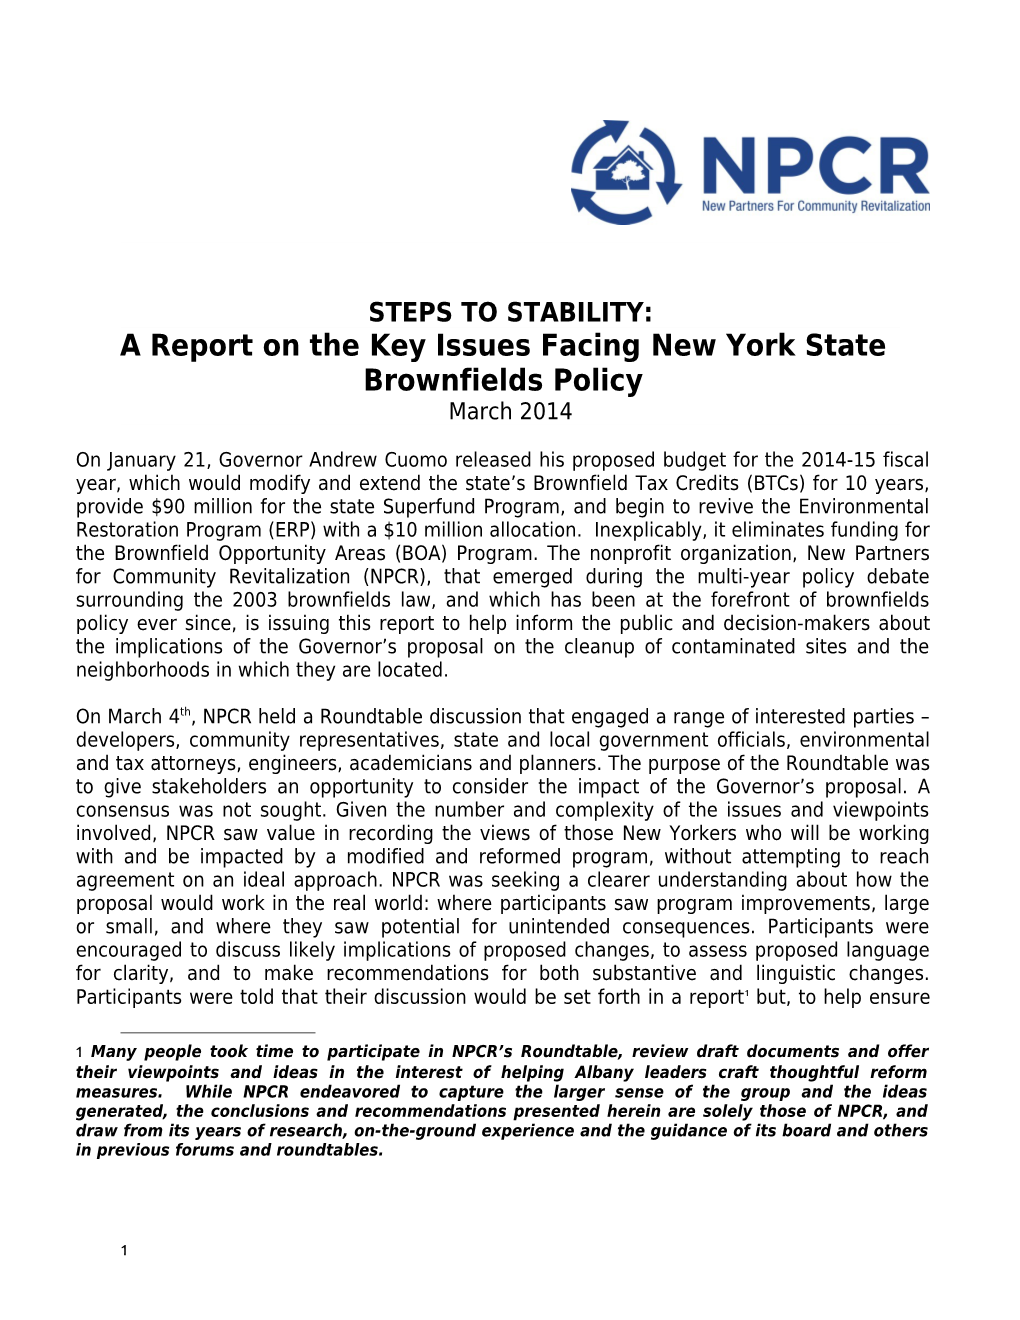 A Report on the Key Issues Facingnew York State Brownfields Policy